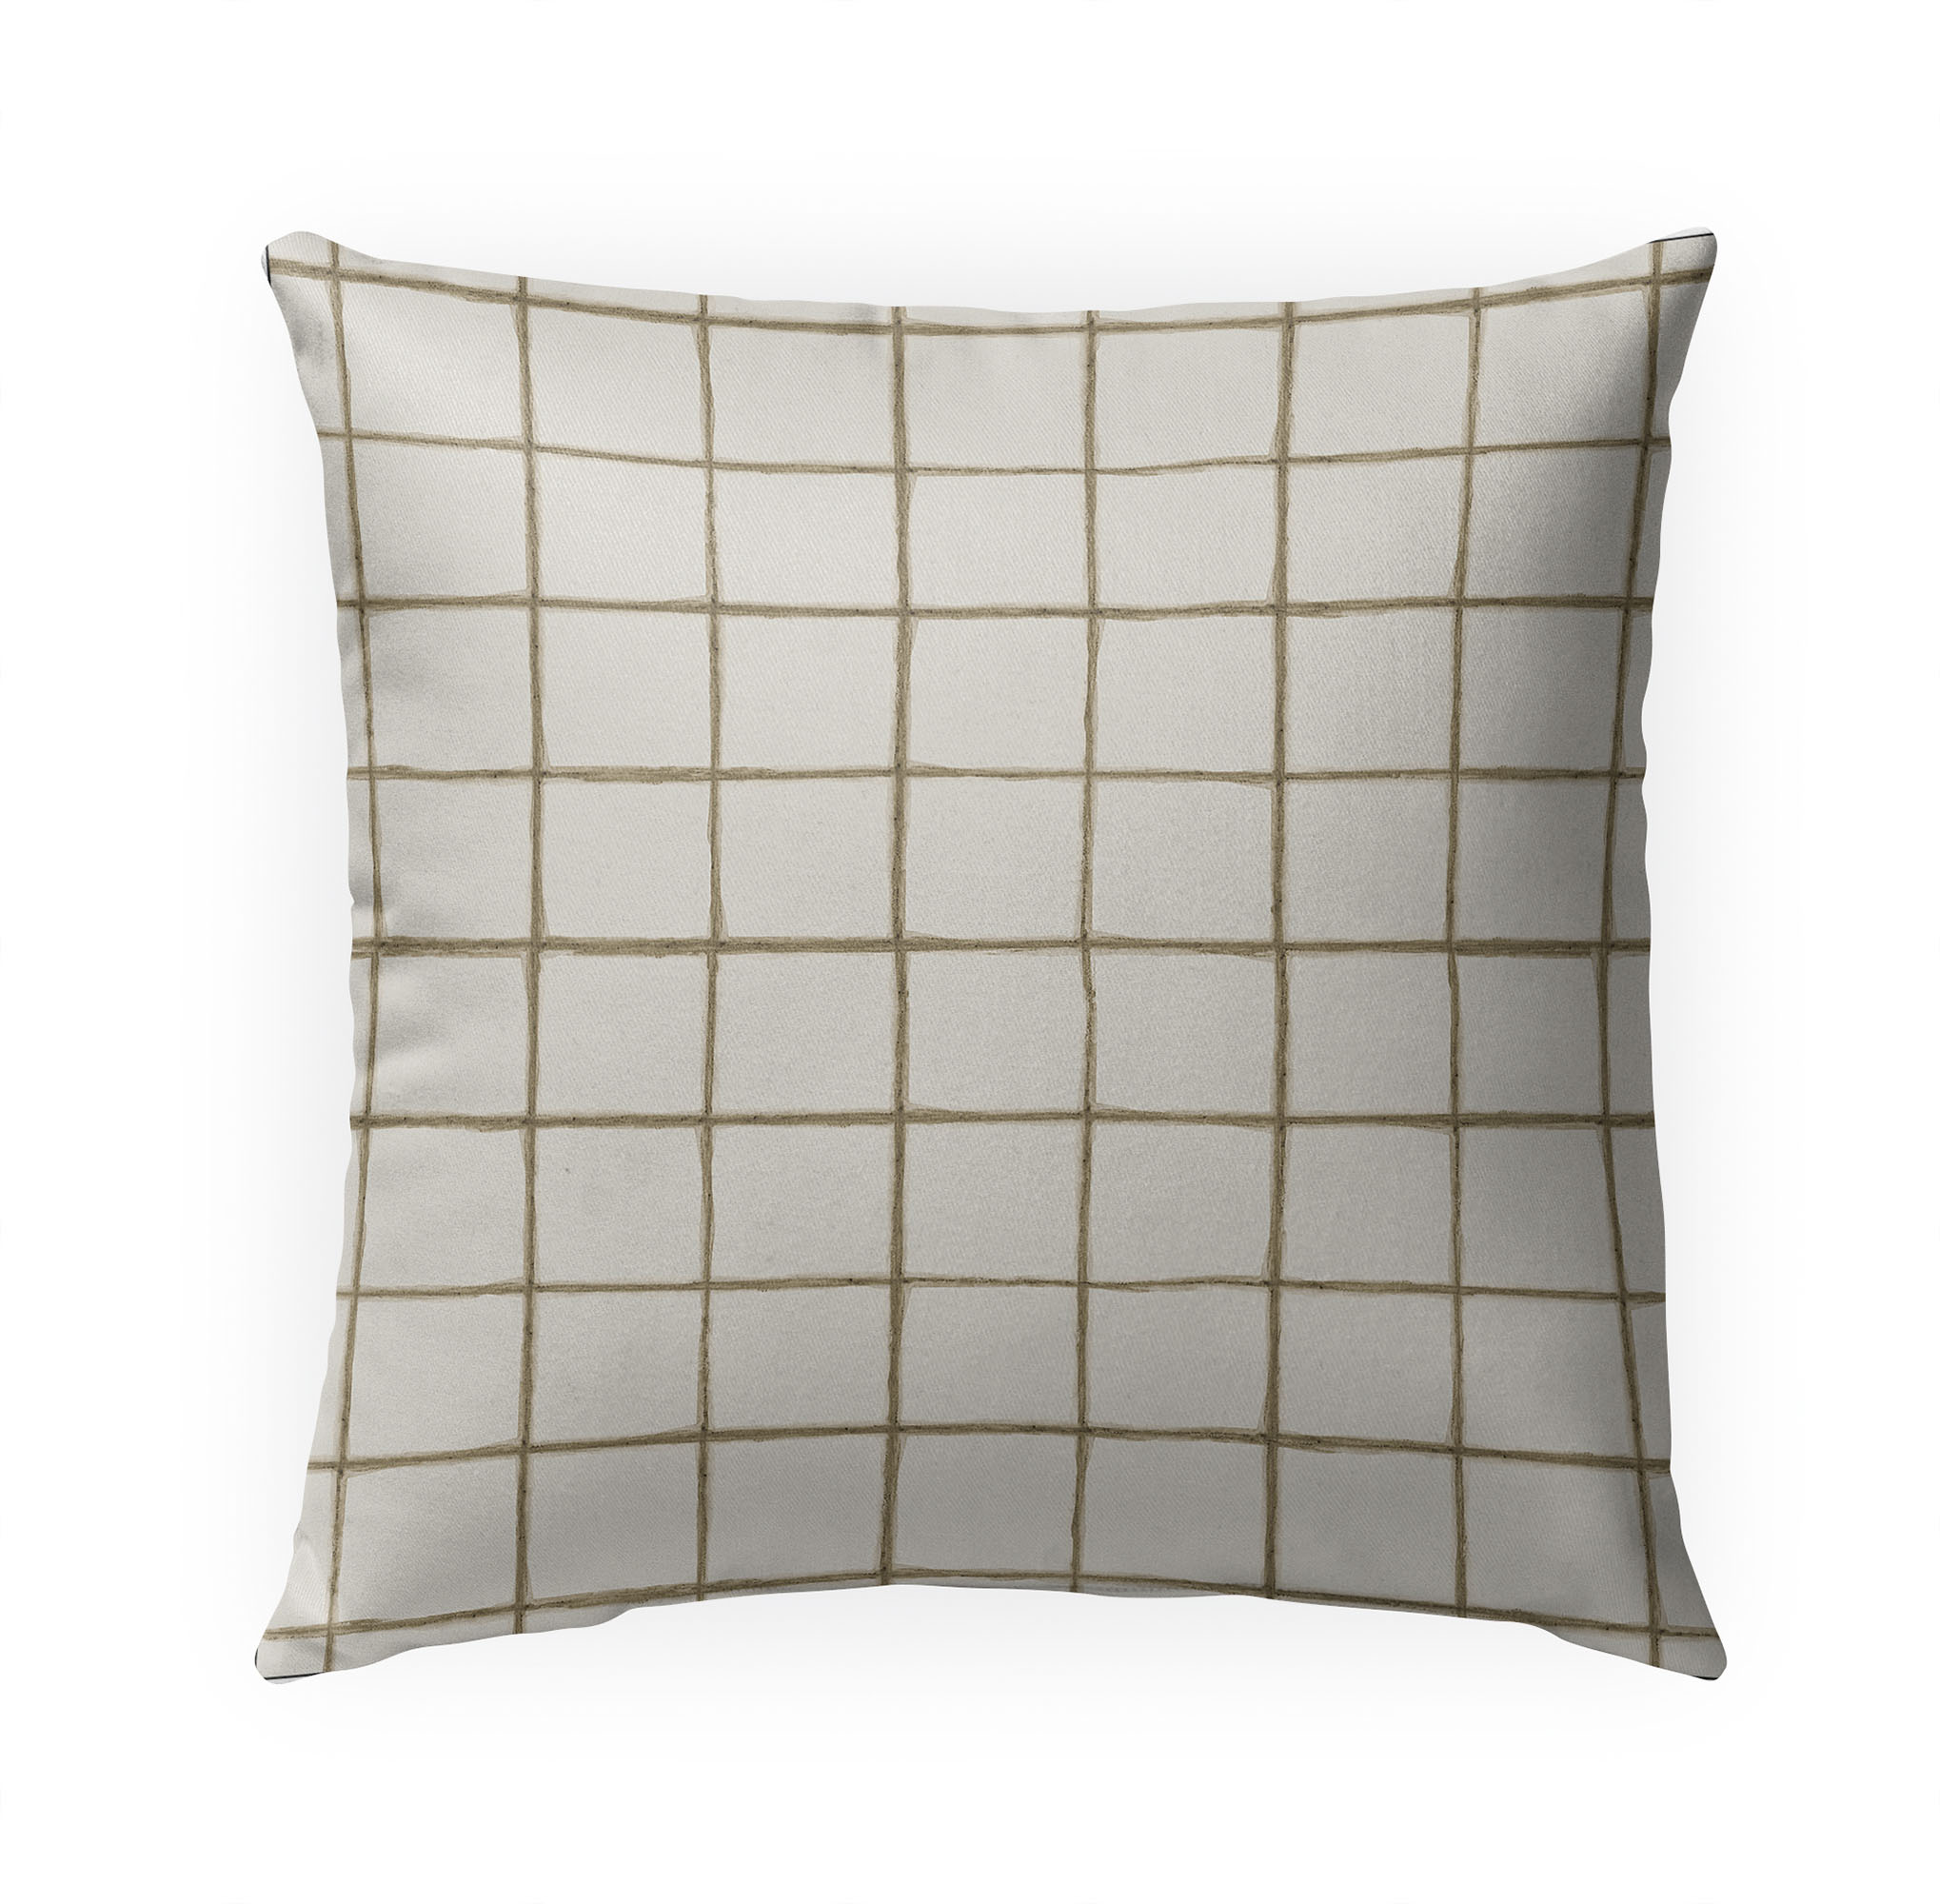 Watercolor Check Beige Outdoor Pillow by Kavka Designs - image 1 of 5